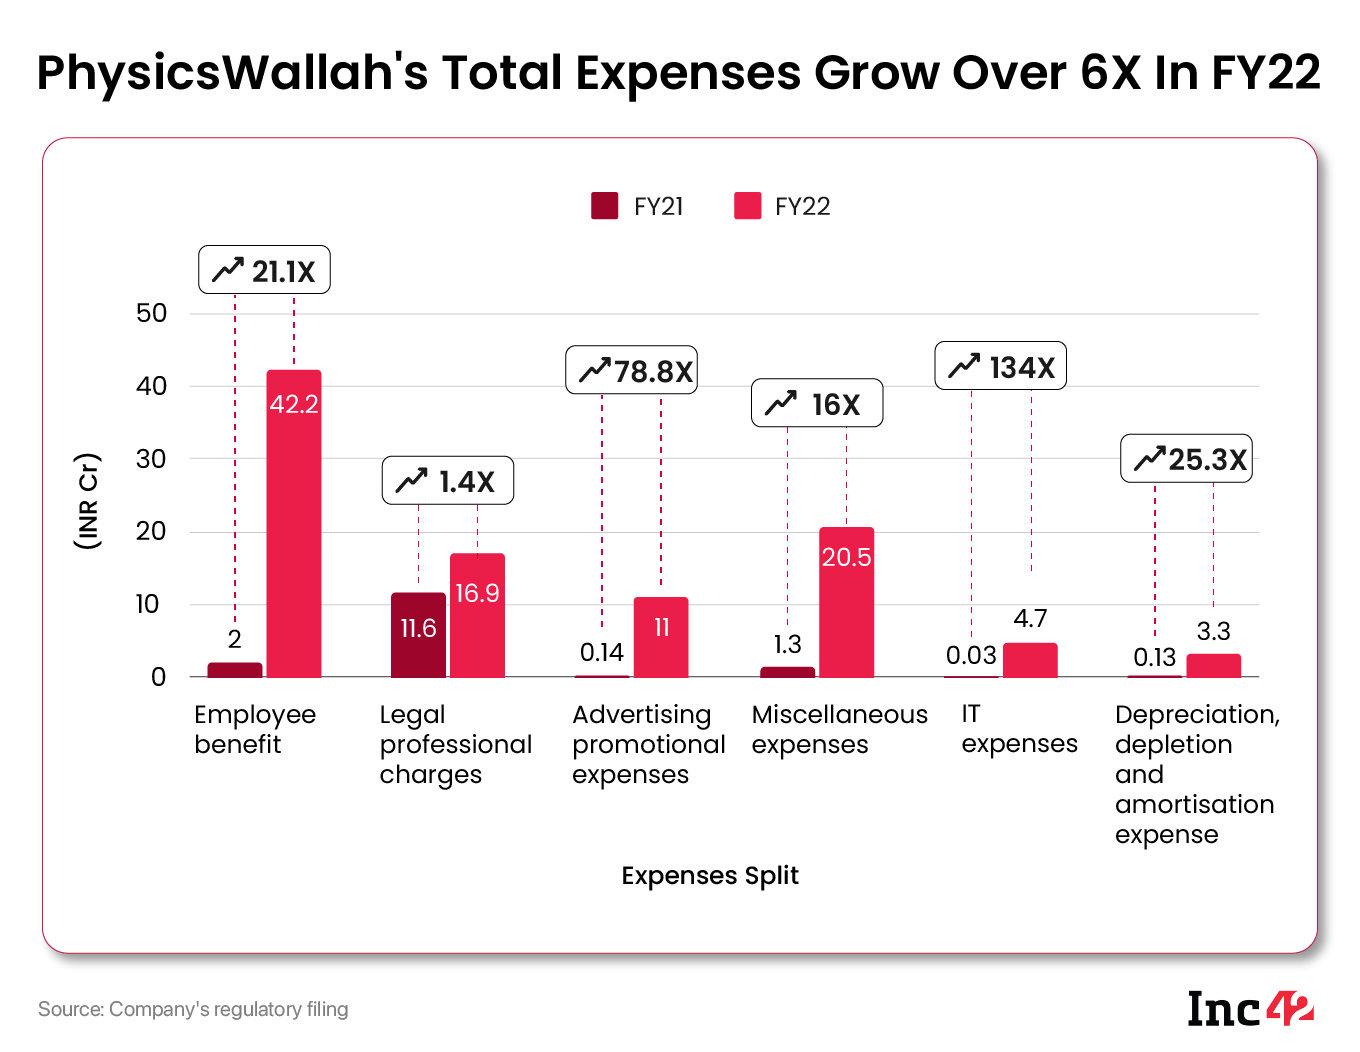 PhysicsWallah’s Total Expenses Grow Over 6X In FY22